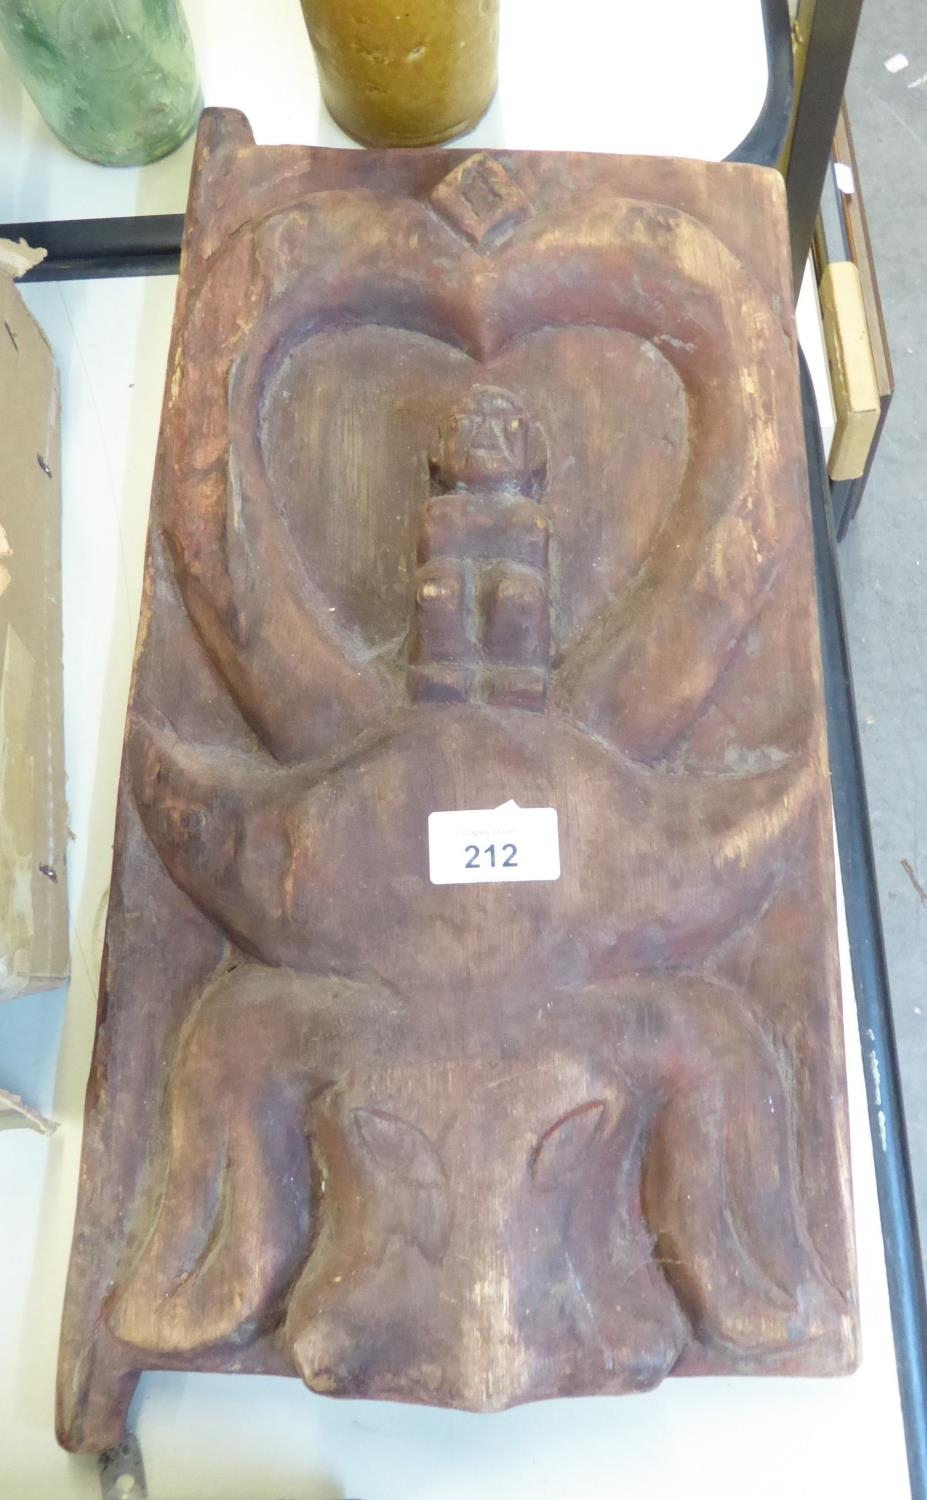 AN ETHNIC CARVED SOFTWOOD DOOR WITH SMALL FIGURES ON THE HEAD OF A BUFFALO, 16” X 9 ½”